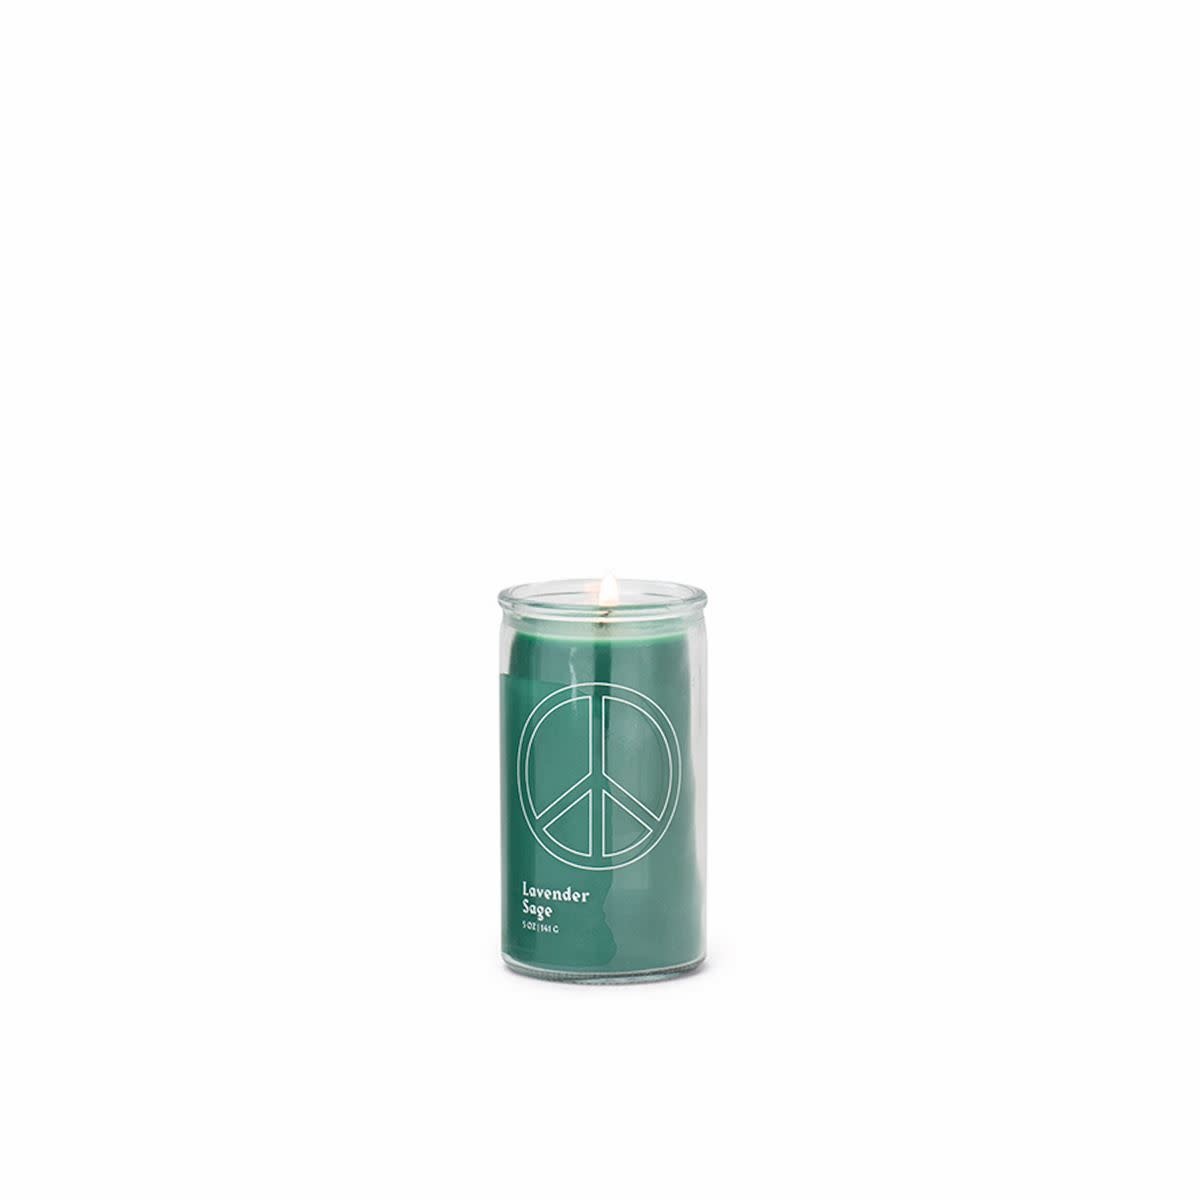 Paddywax - PA Forest Green Peace Sign Spark Candle, Lavender Sage